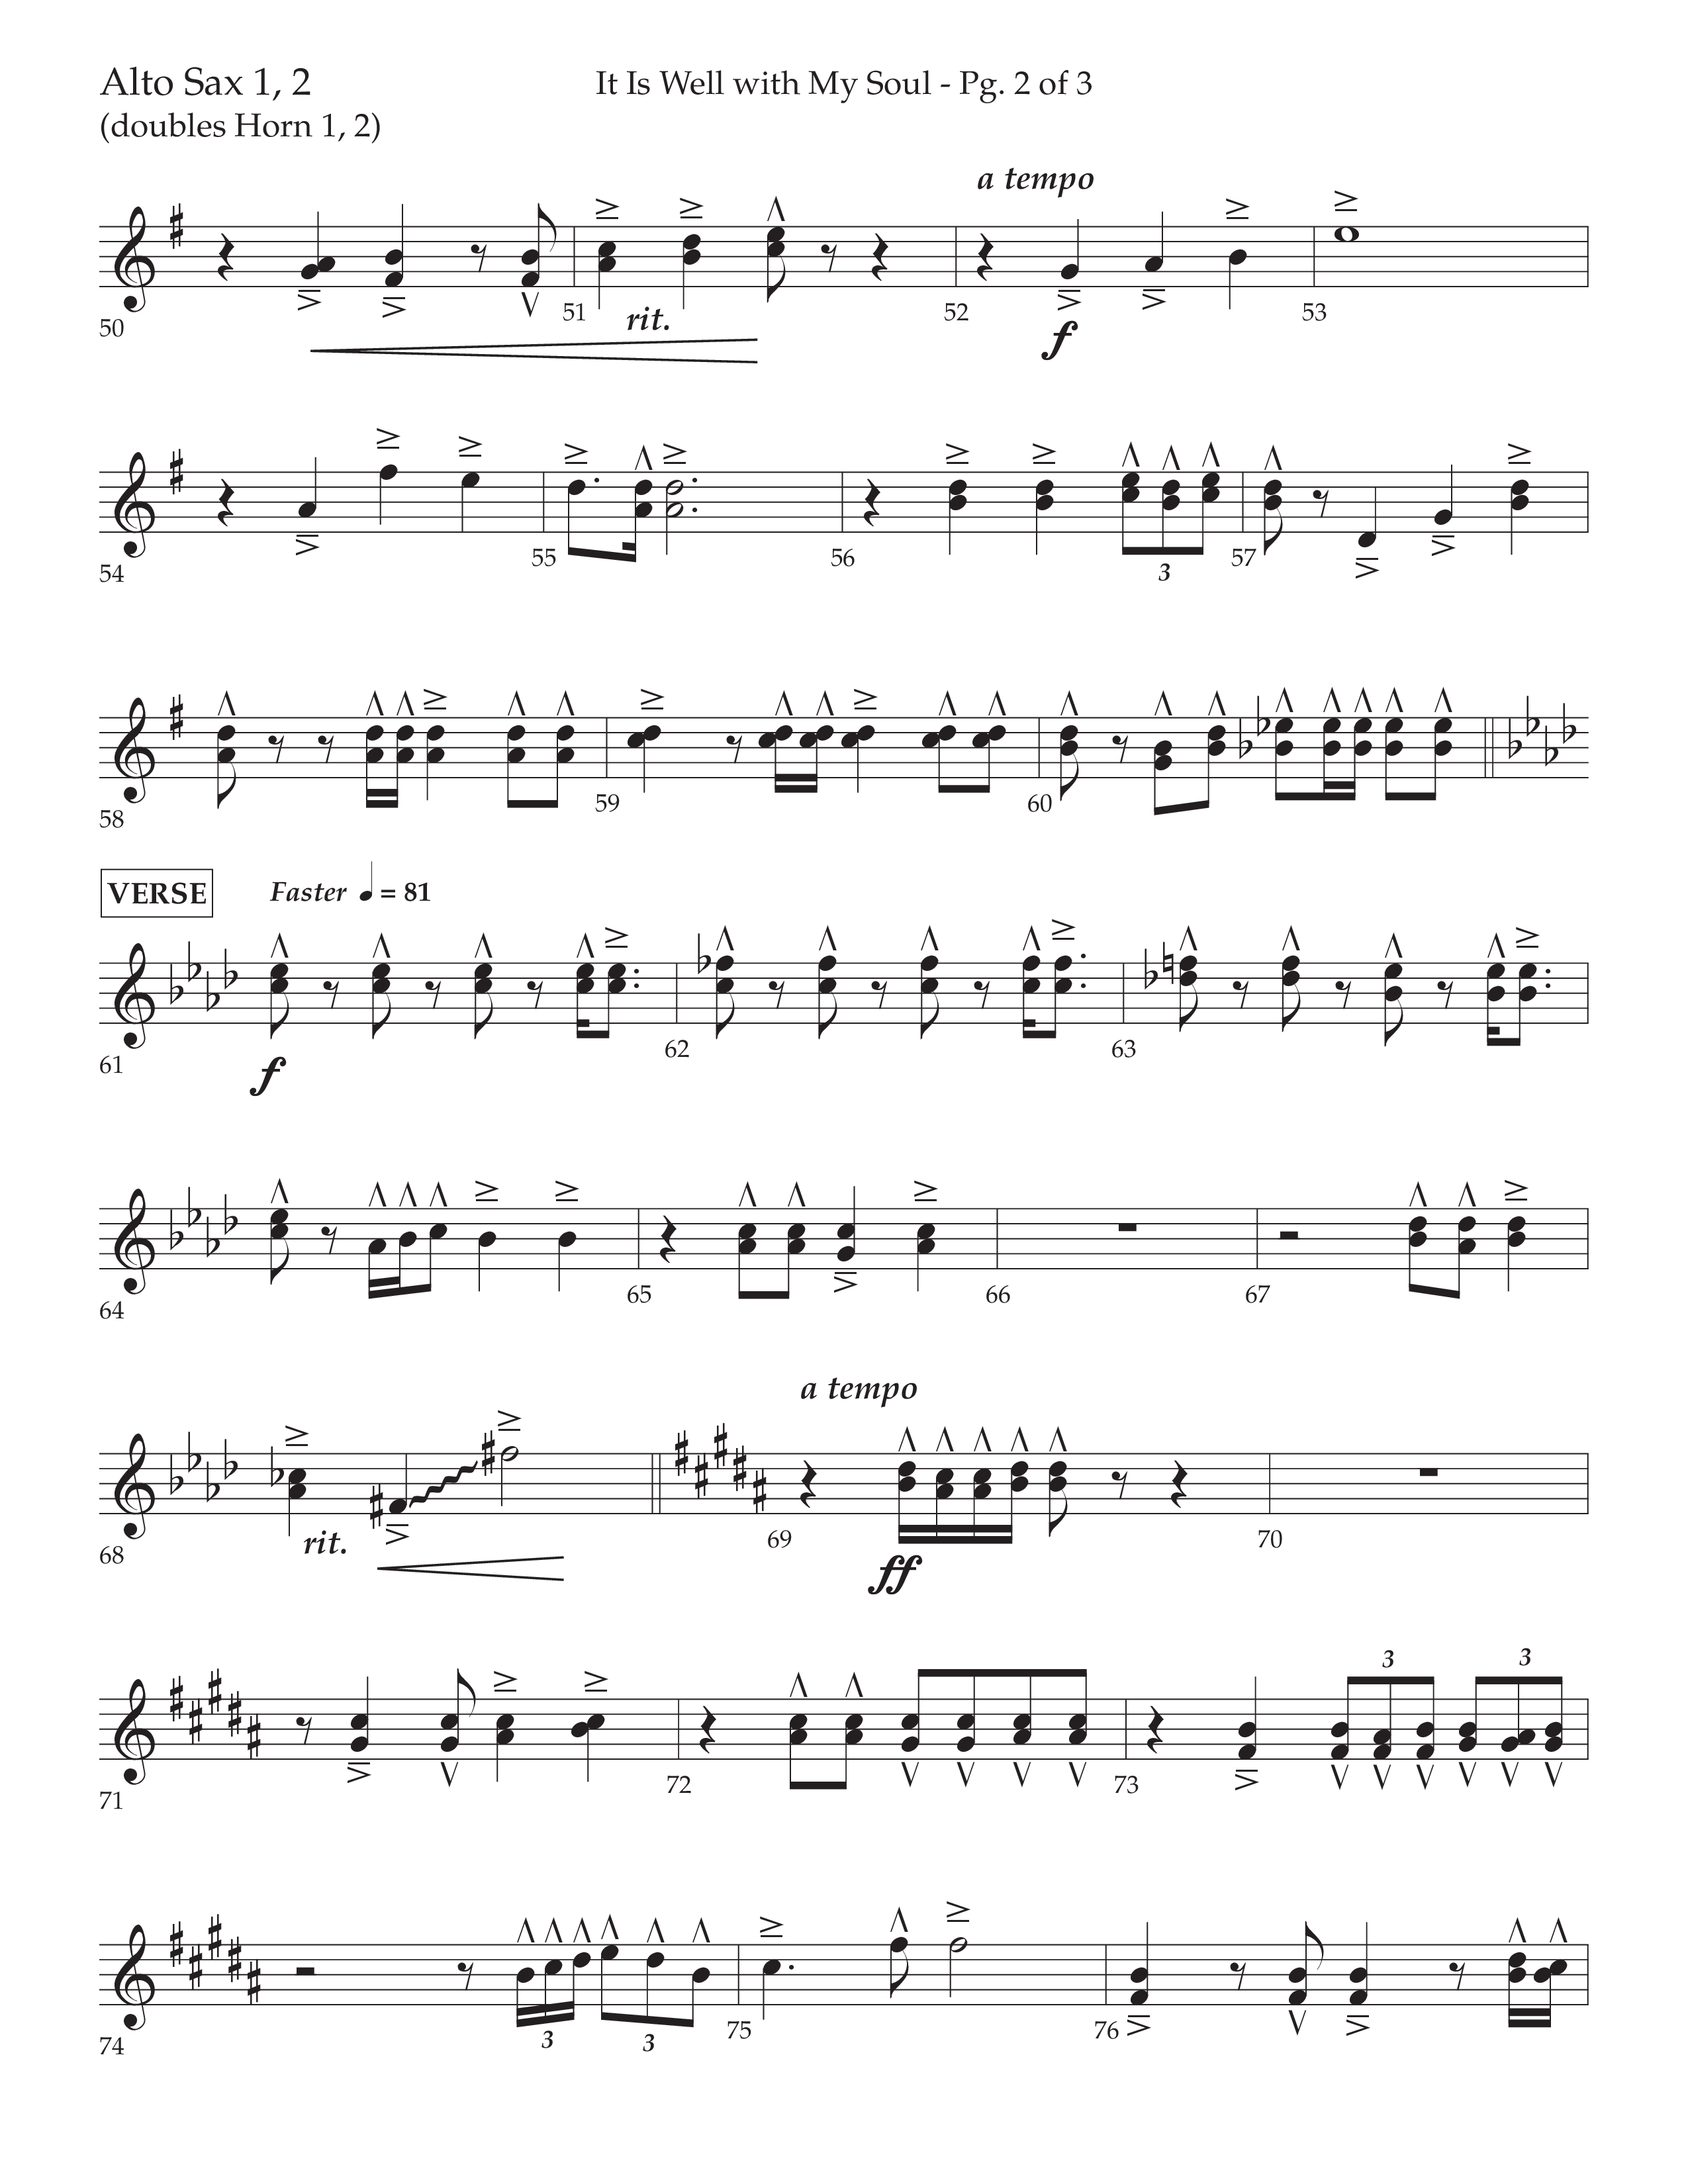 It Is Well With My Soul (Choral Anthem SATB) Alto Sax 1/2 (Lifeway Choral / Arr. John Bolin / Orch. David Clydesdale)